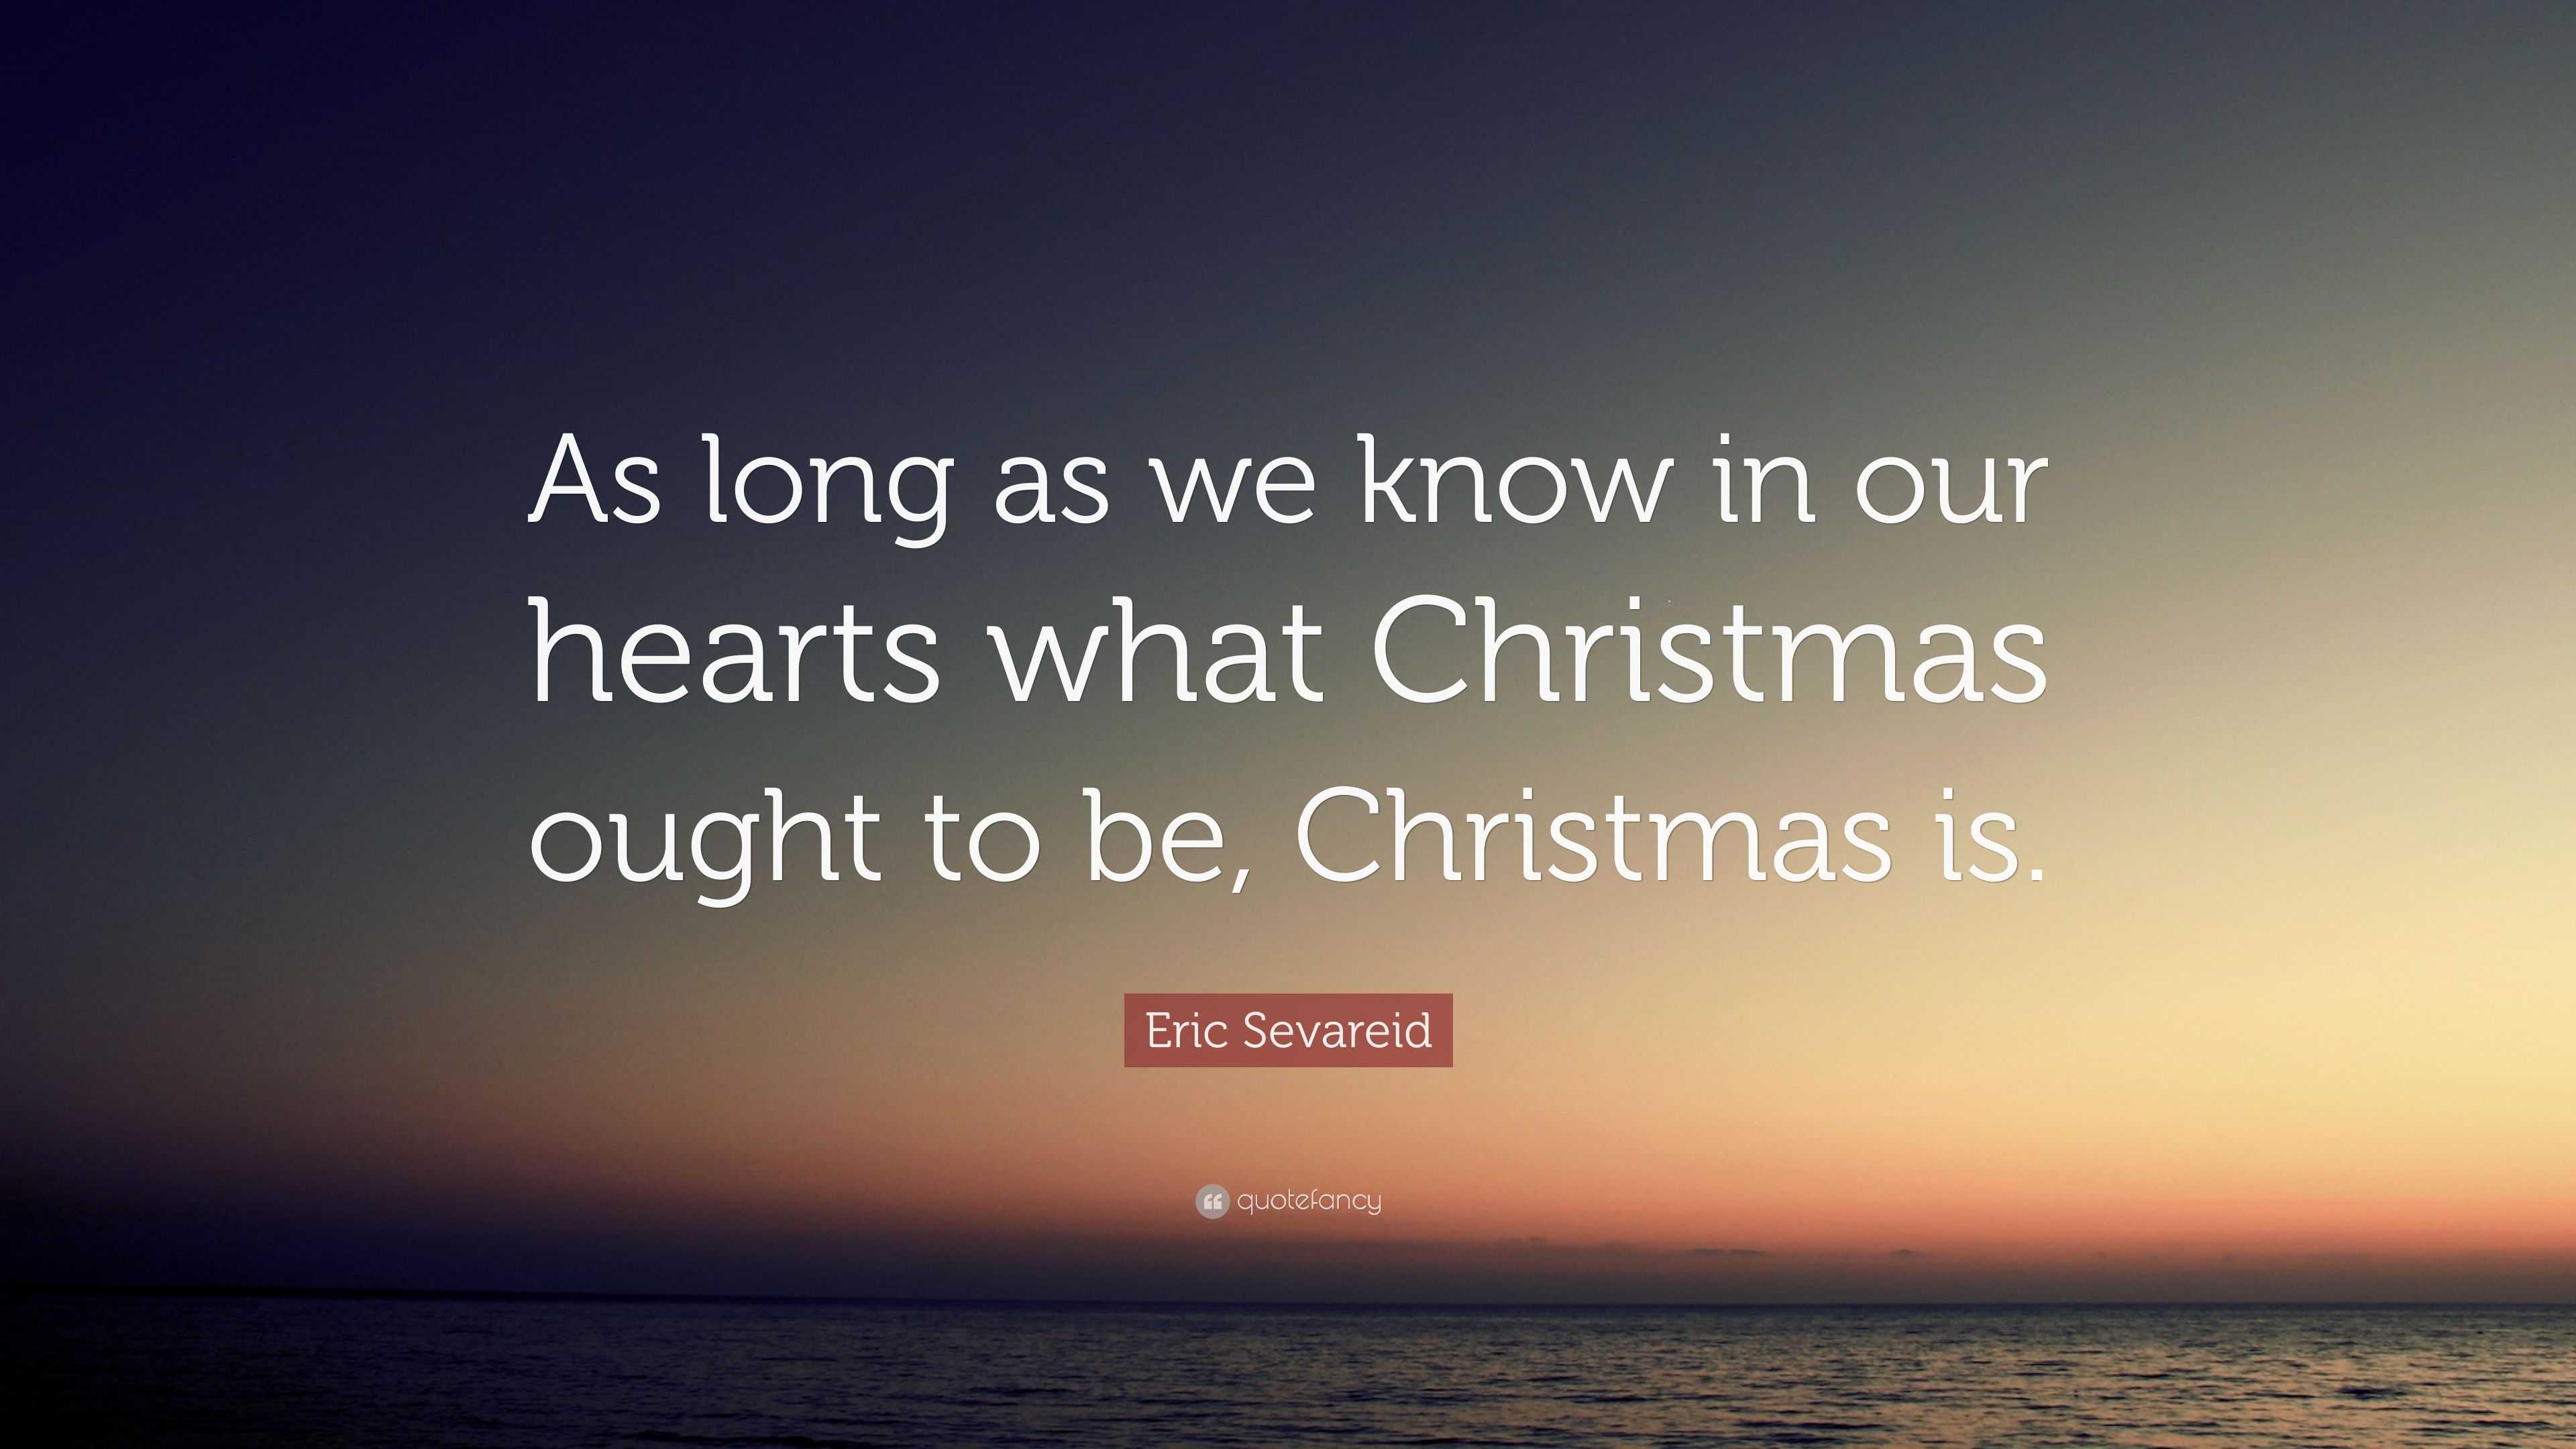 Eric Sevareid Quote: “As long as we know in our hearts what Christmas ...